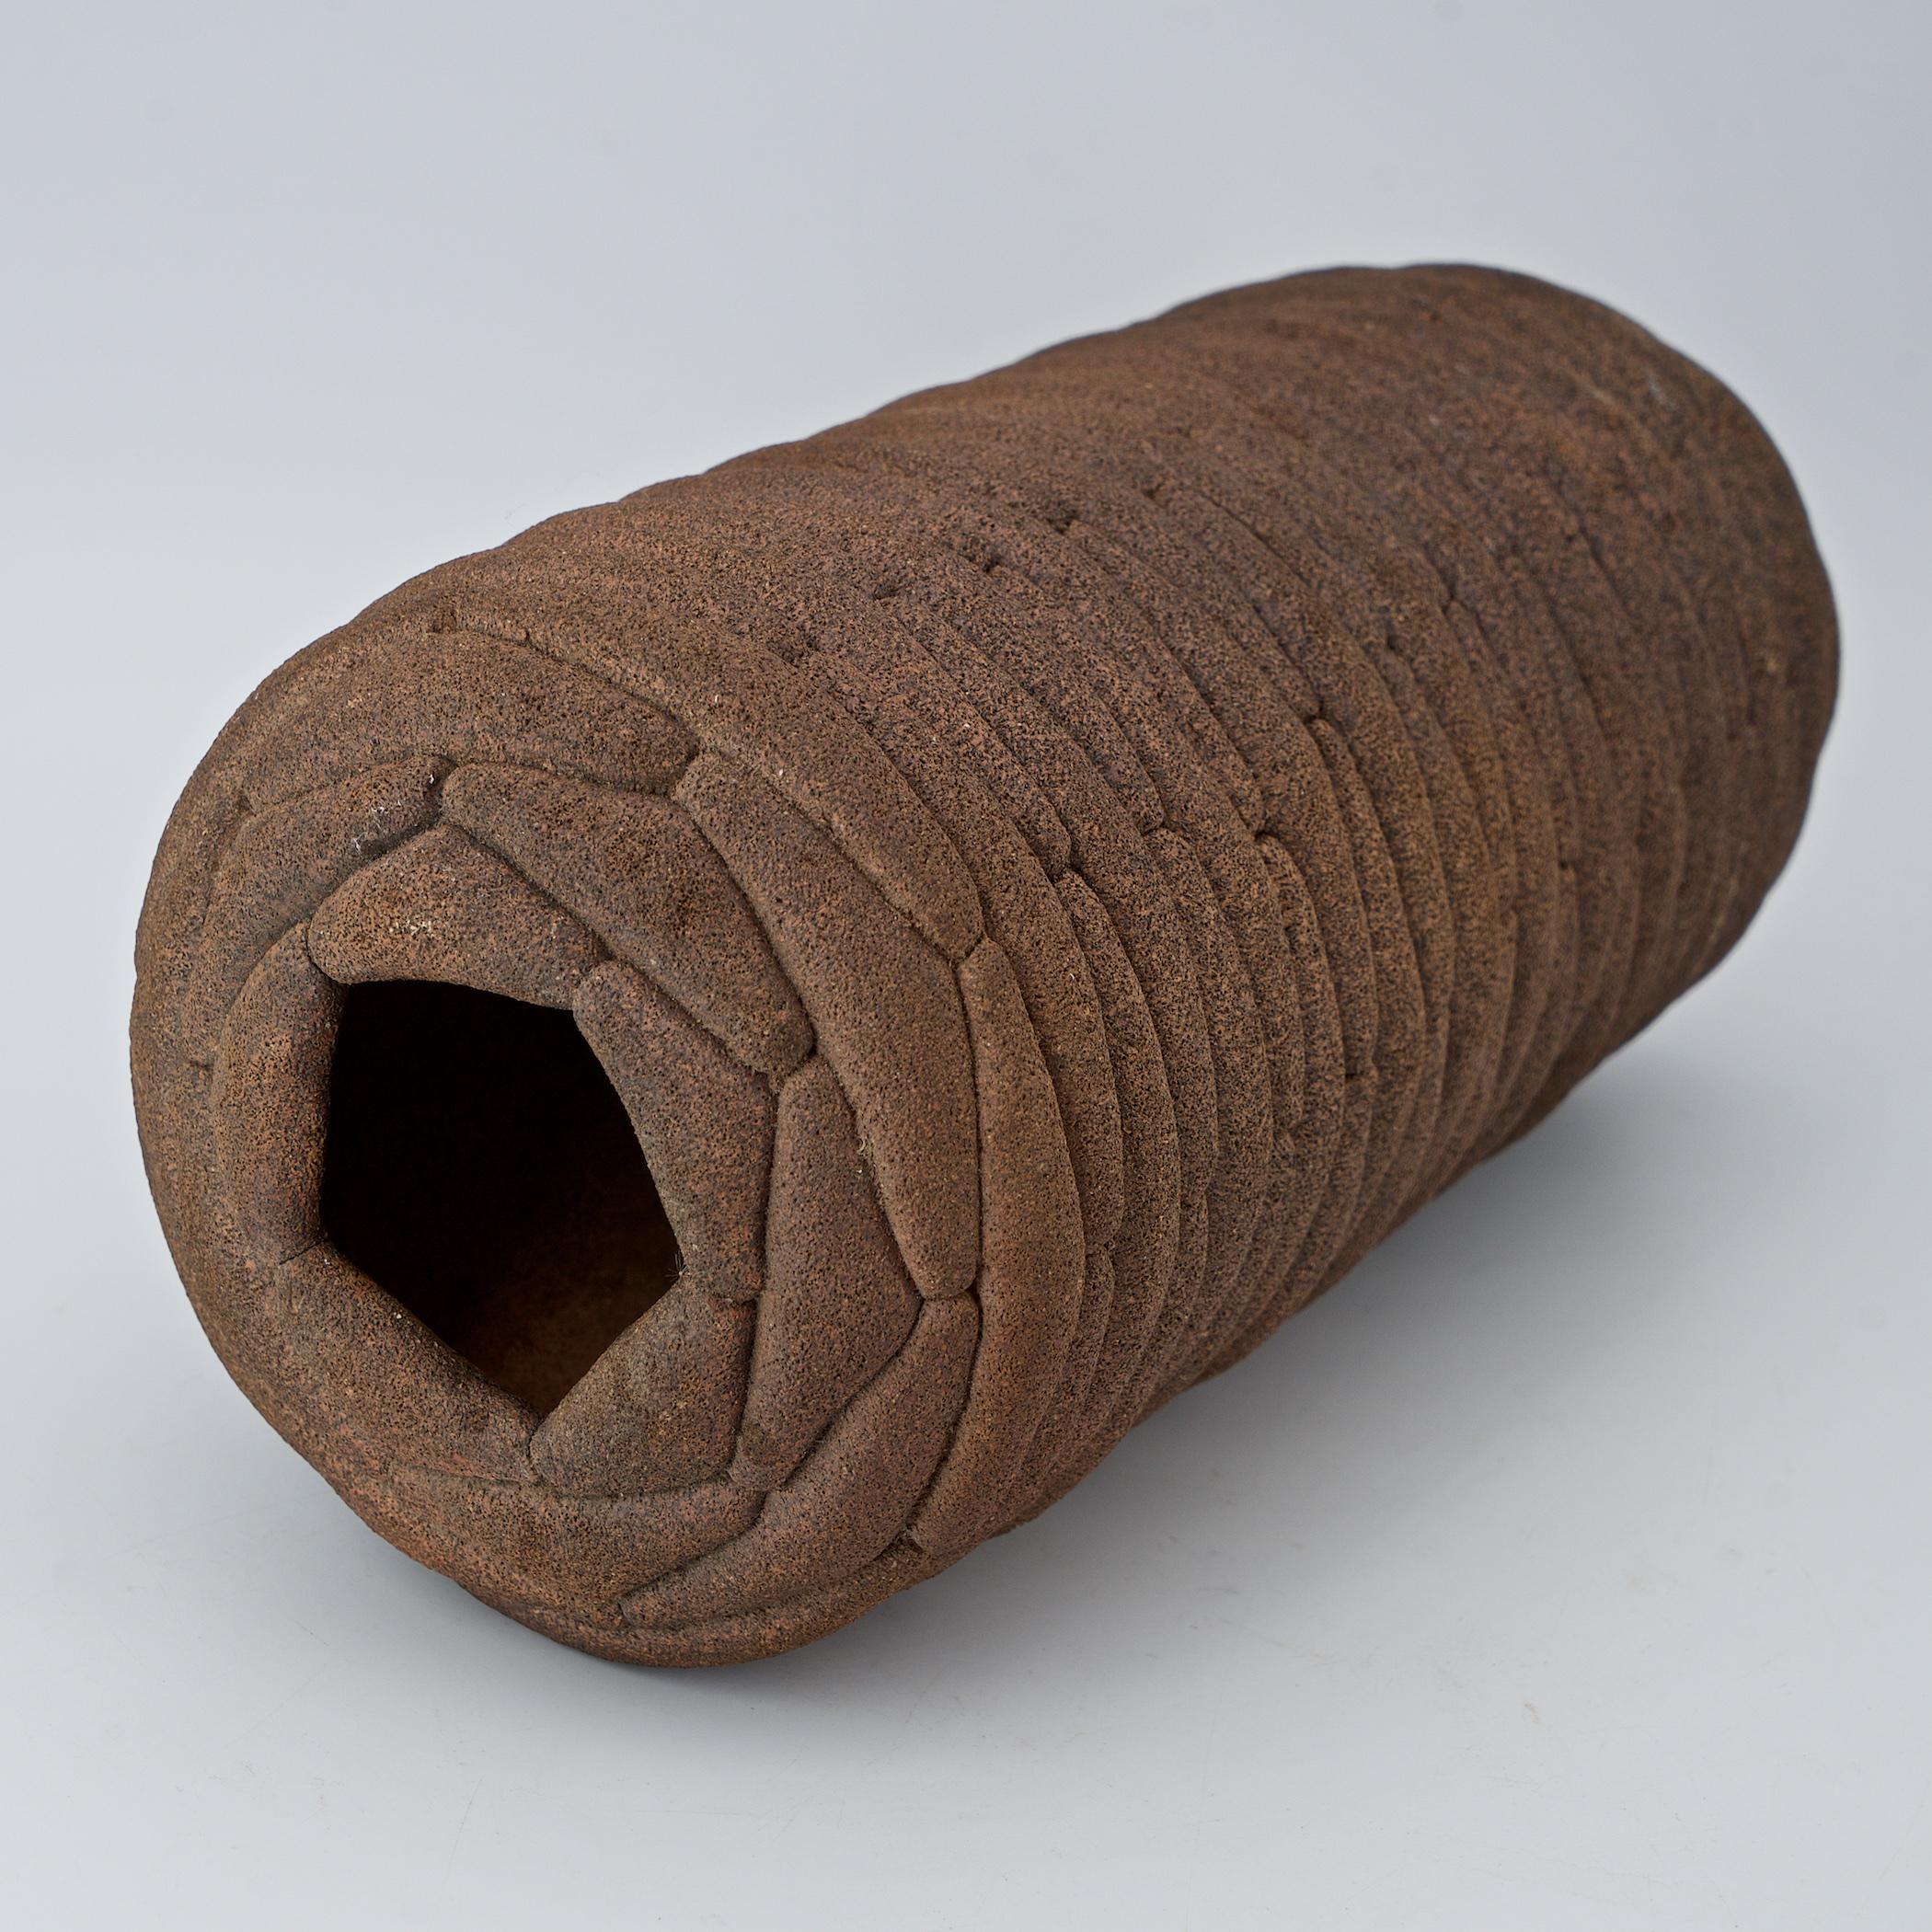 1980s Elephant Hide Textural Folds Stoneware Cylindrical Vase In Fair Condition For Sale In Hyattsville, MD